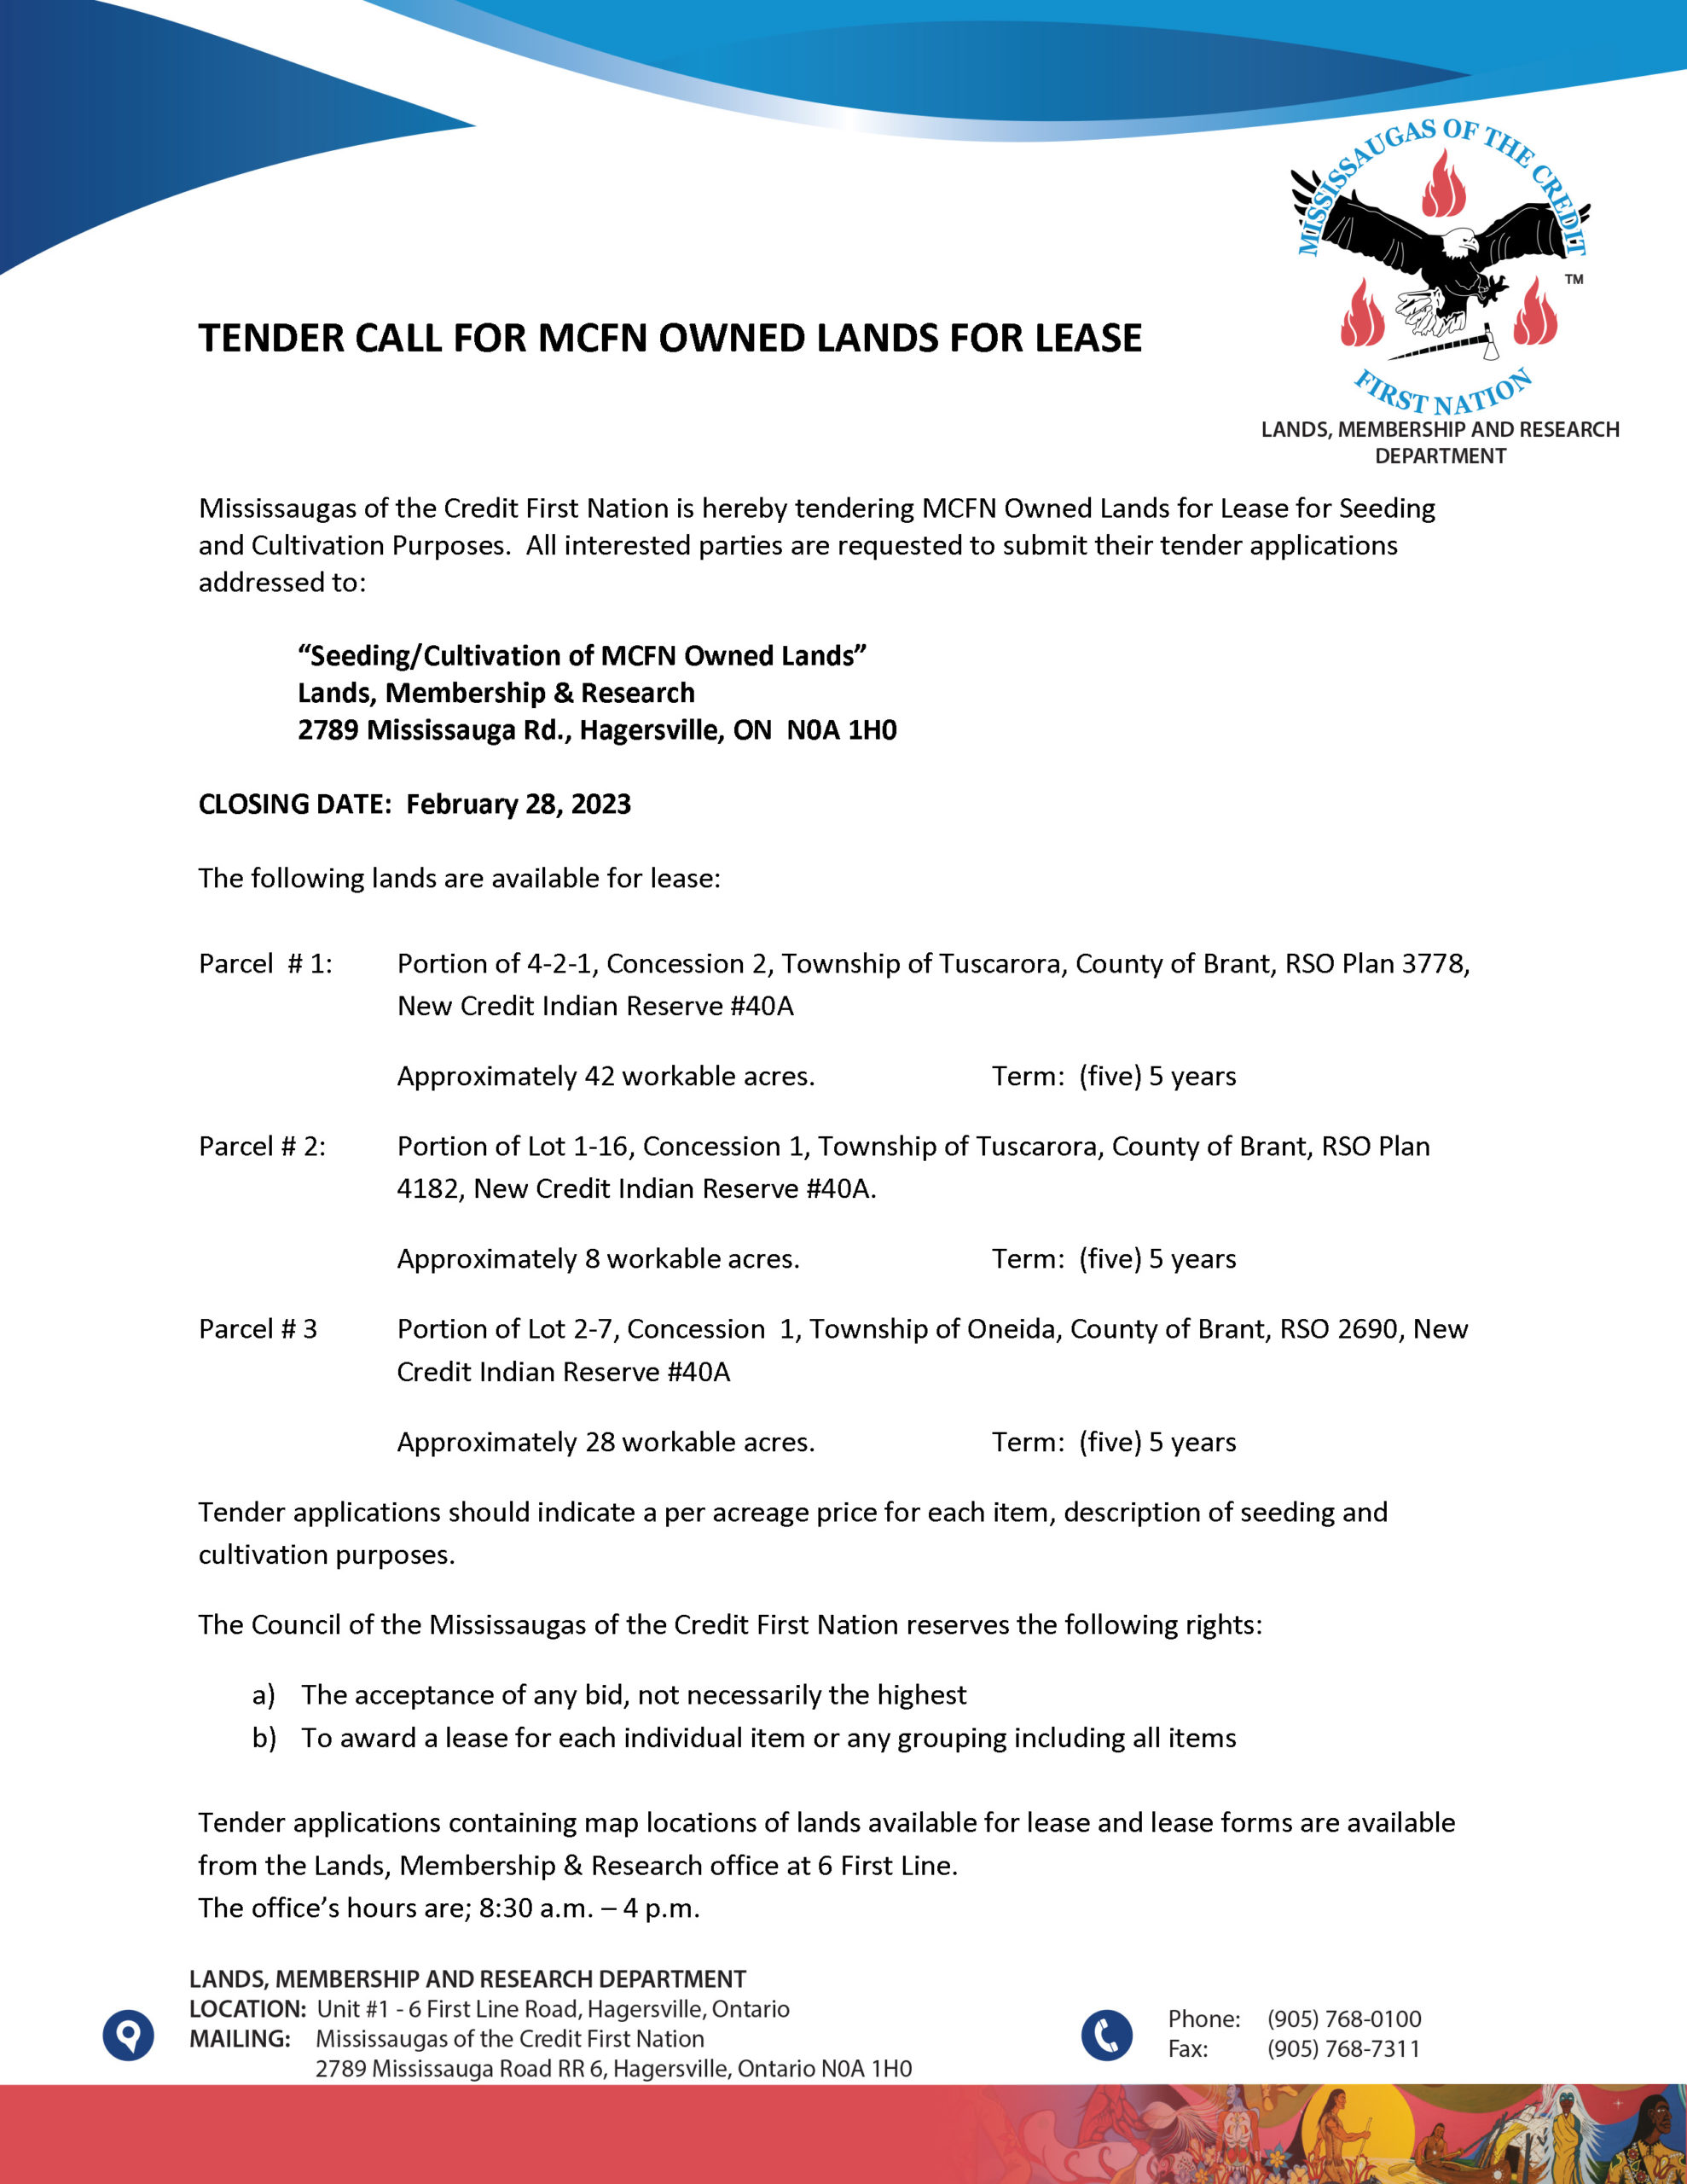 Tender Call for MCFN owned lands for lease